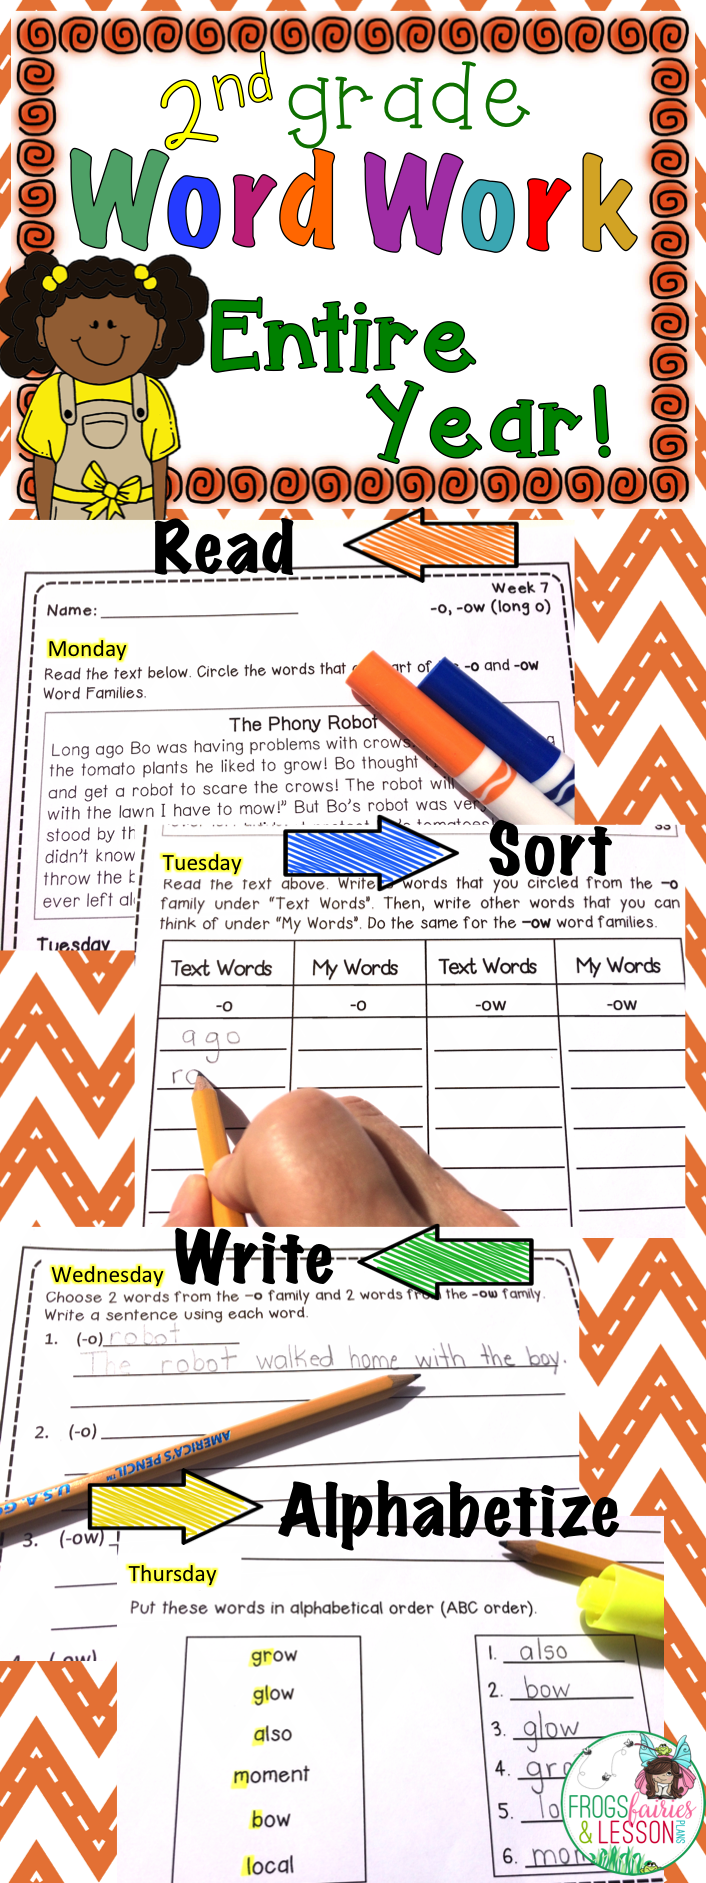 Second Grade Word Work - Whole Year -   25 2 week families
 ideas